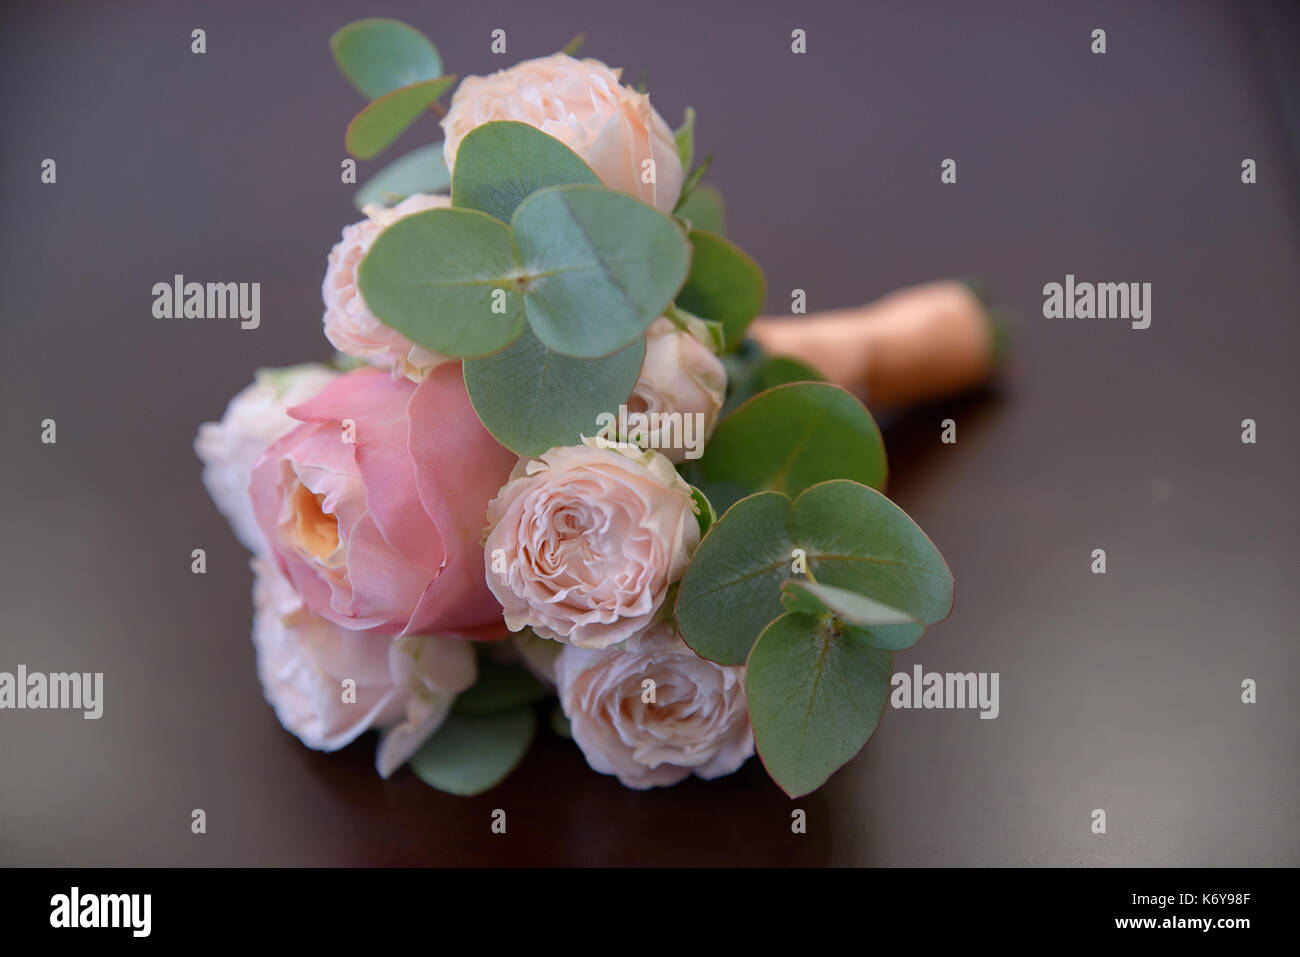 Horizontal shot of glamorous wedding bouquet featuring pink peonies and greenery against mauve background Stock Photo